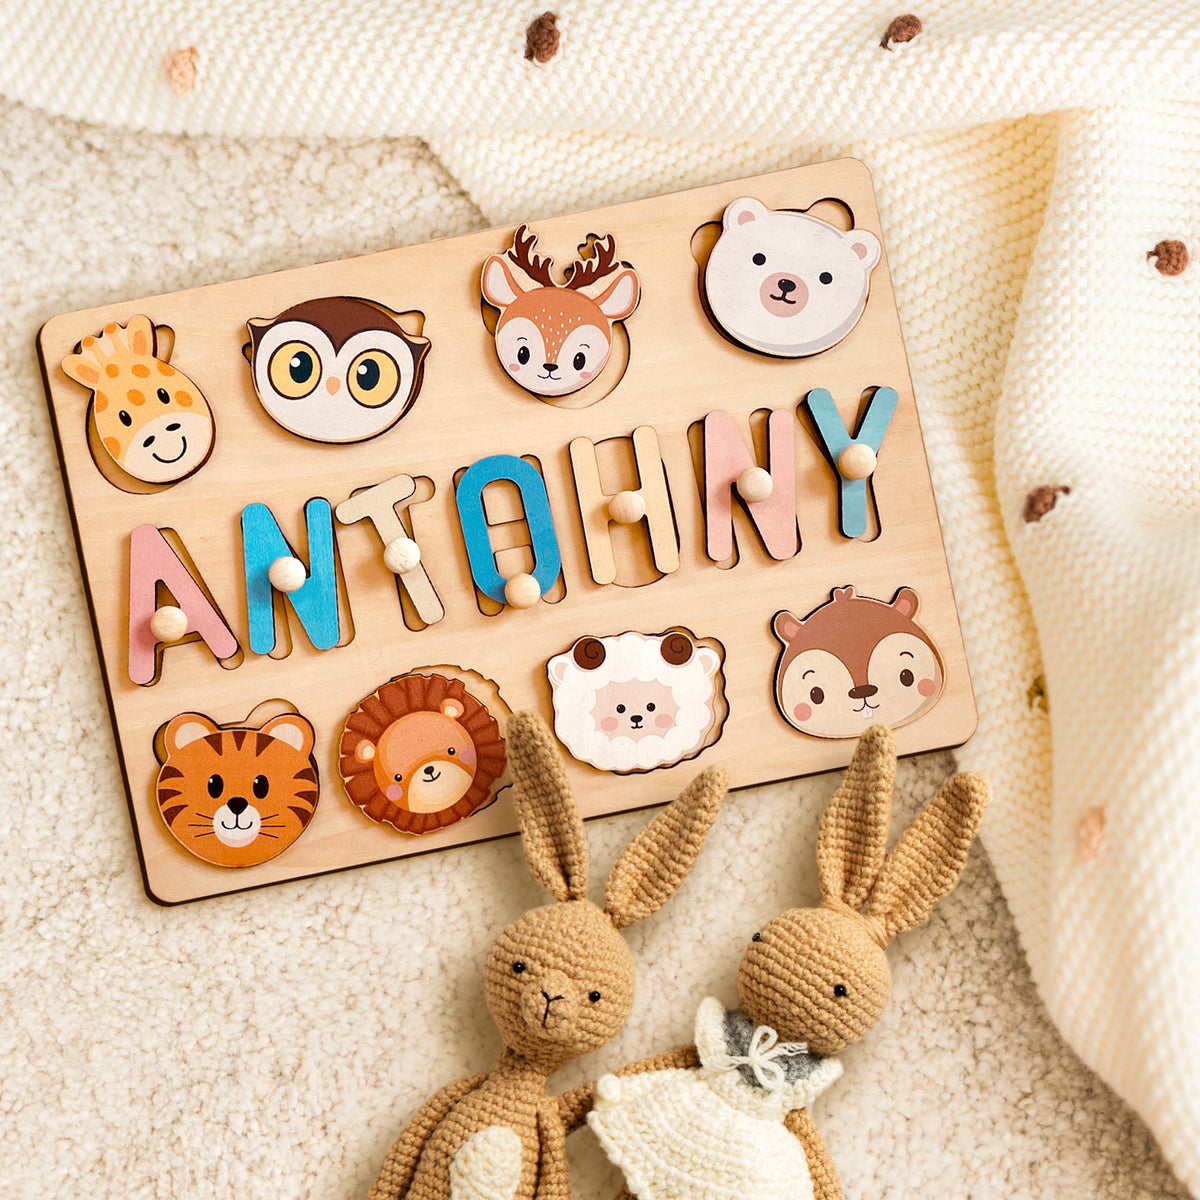 Customizedbee Personalized Name Puzzle,3 line,Wooden Puzzles for Toddlers 1-3, Easter Gifts for Toddlers